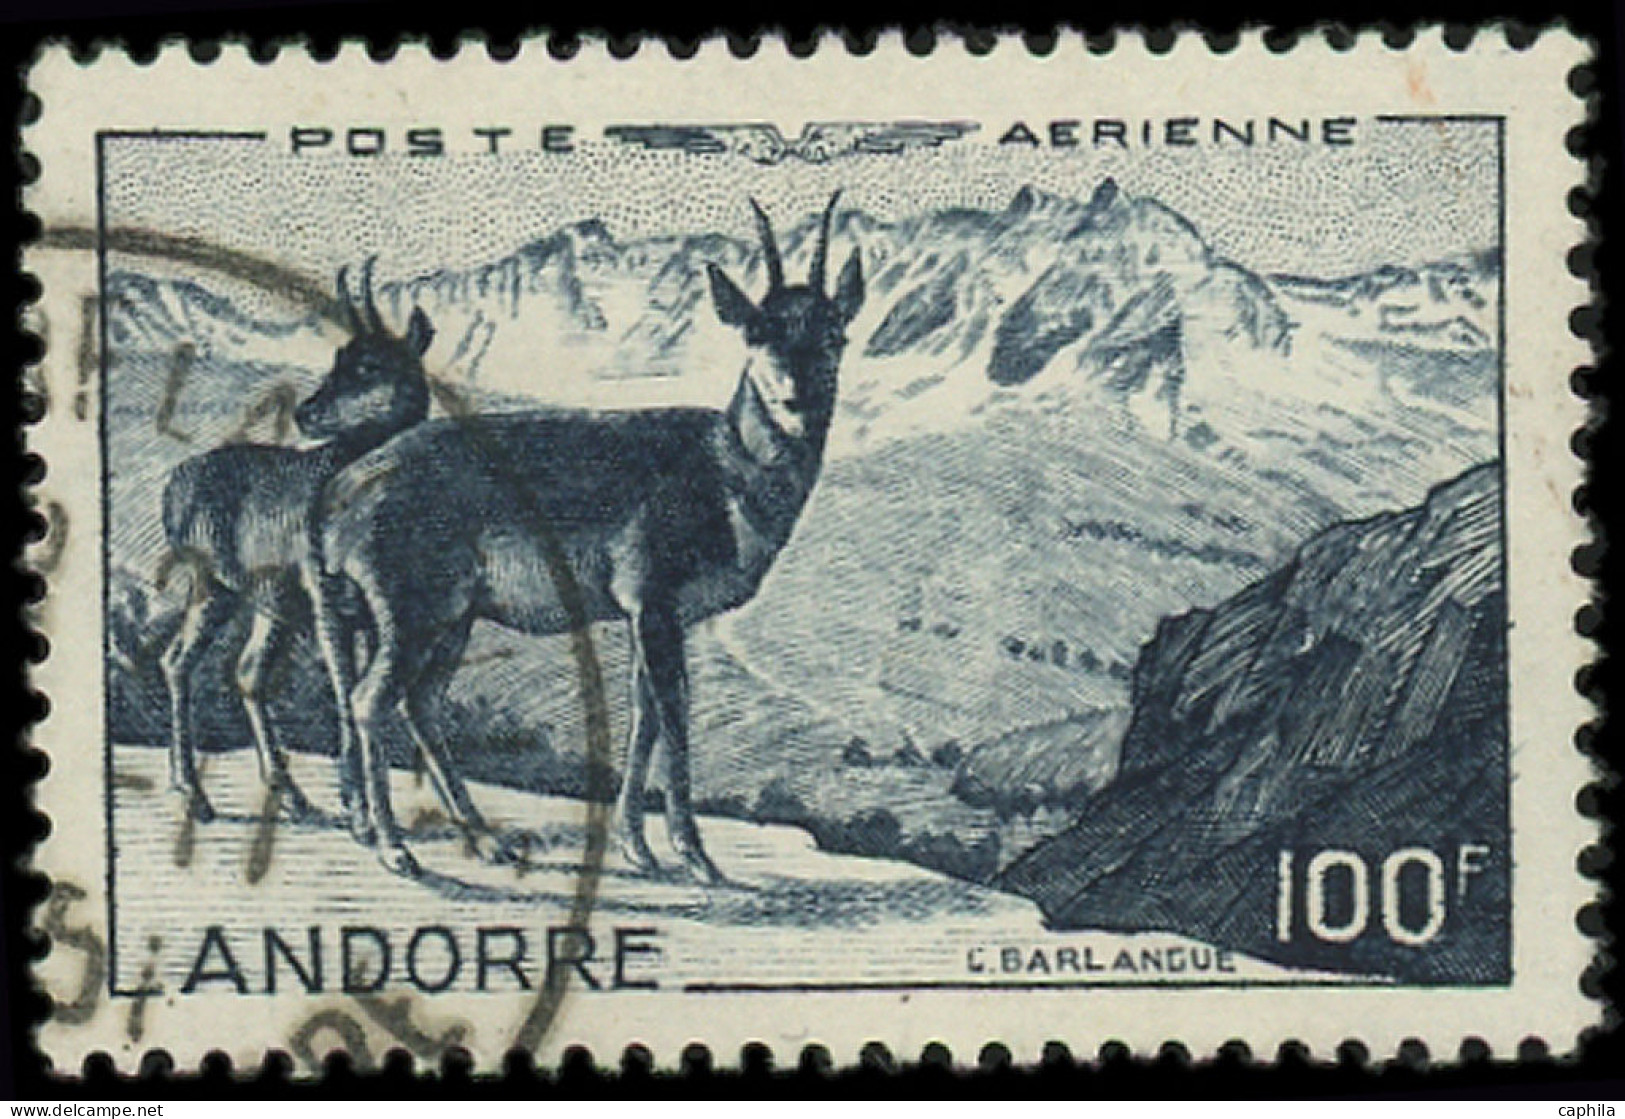 O ANDORRE - Poste Aérienne - 1, Isards - Airmail